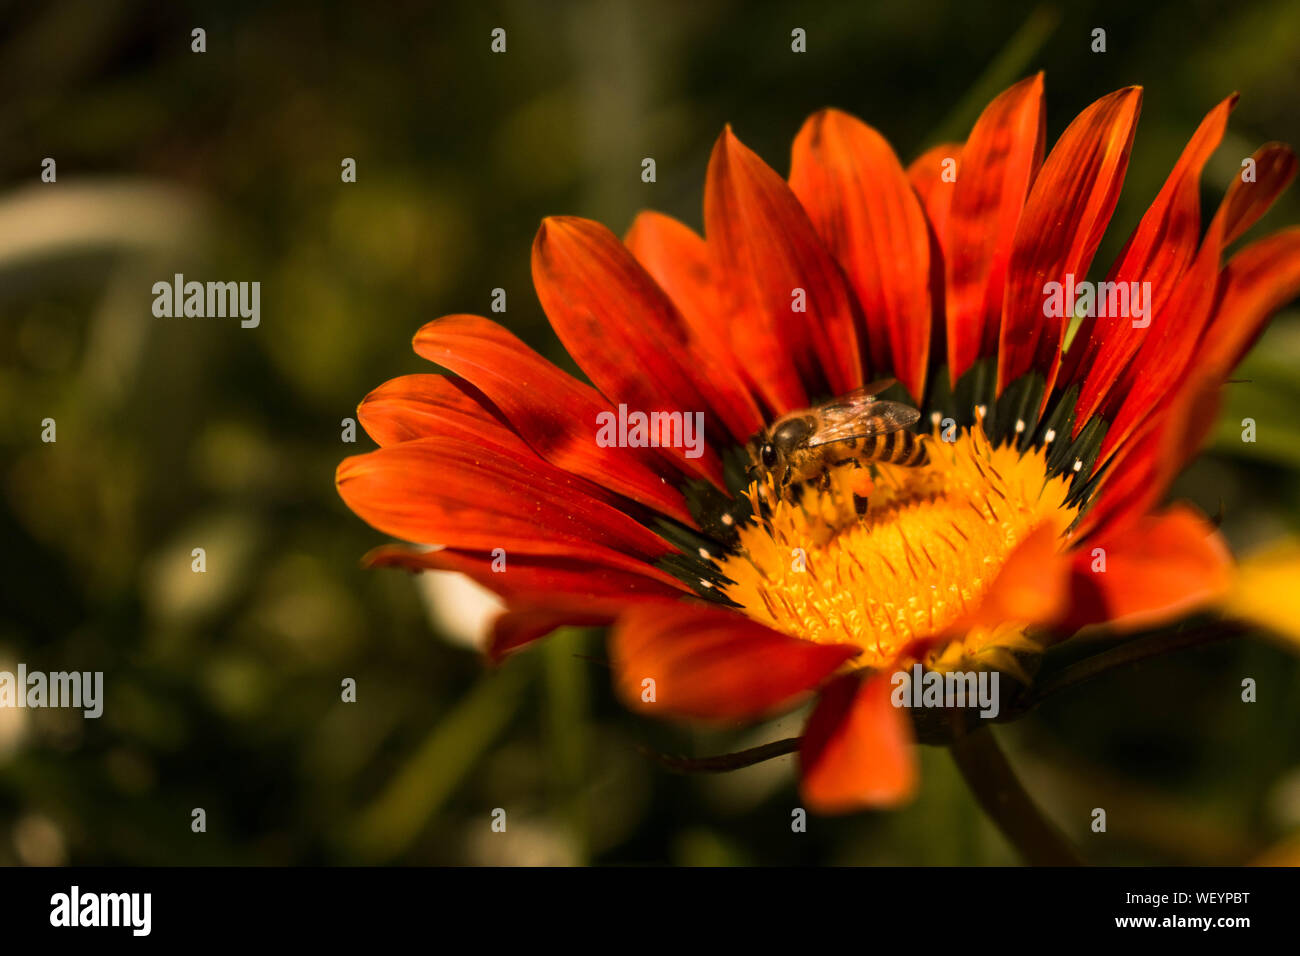 A close up shot of flowers in the garden making perfect wallpaper backgrounds. Stock Photo